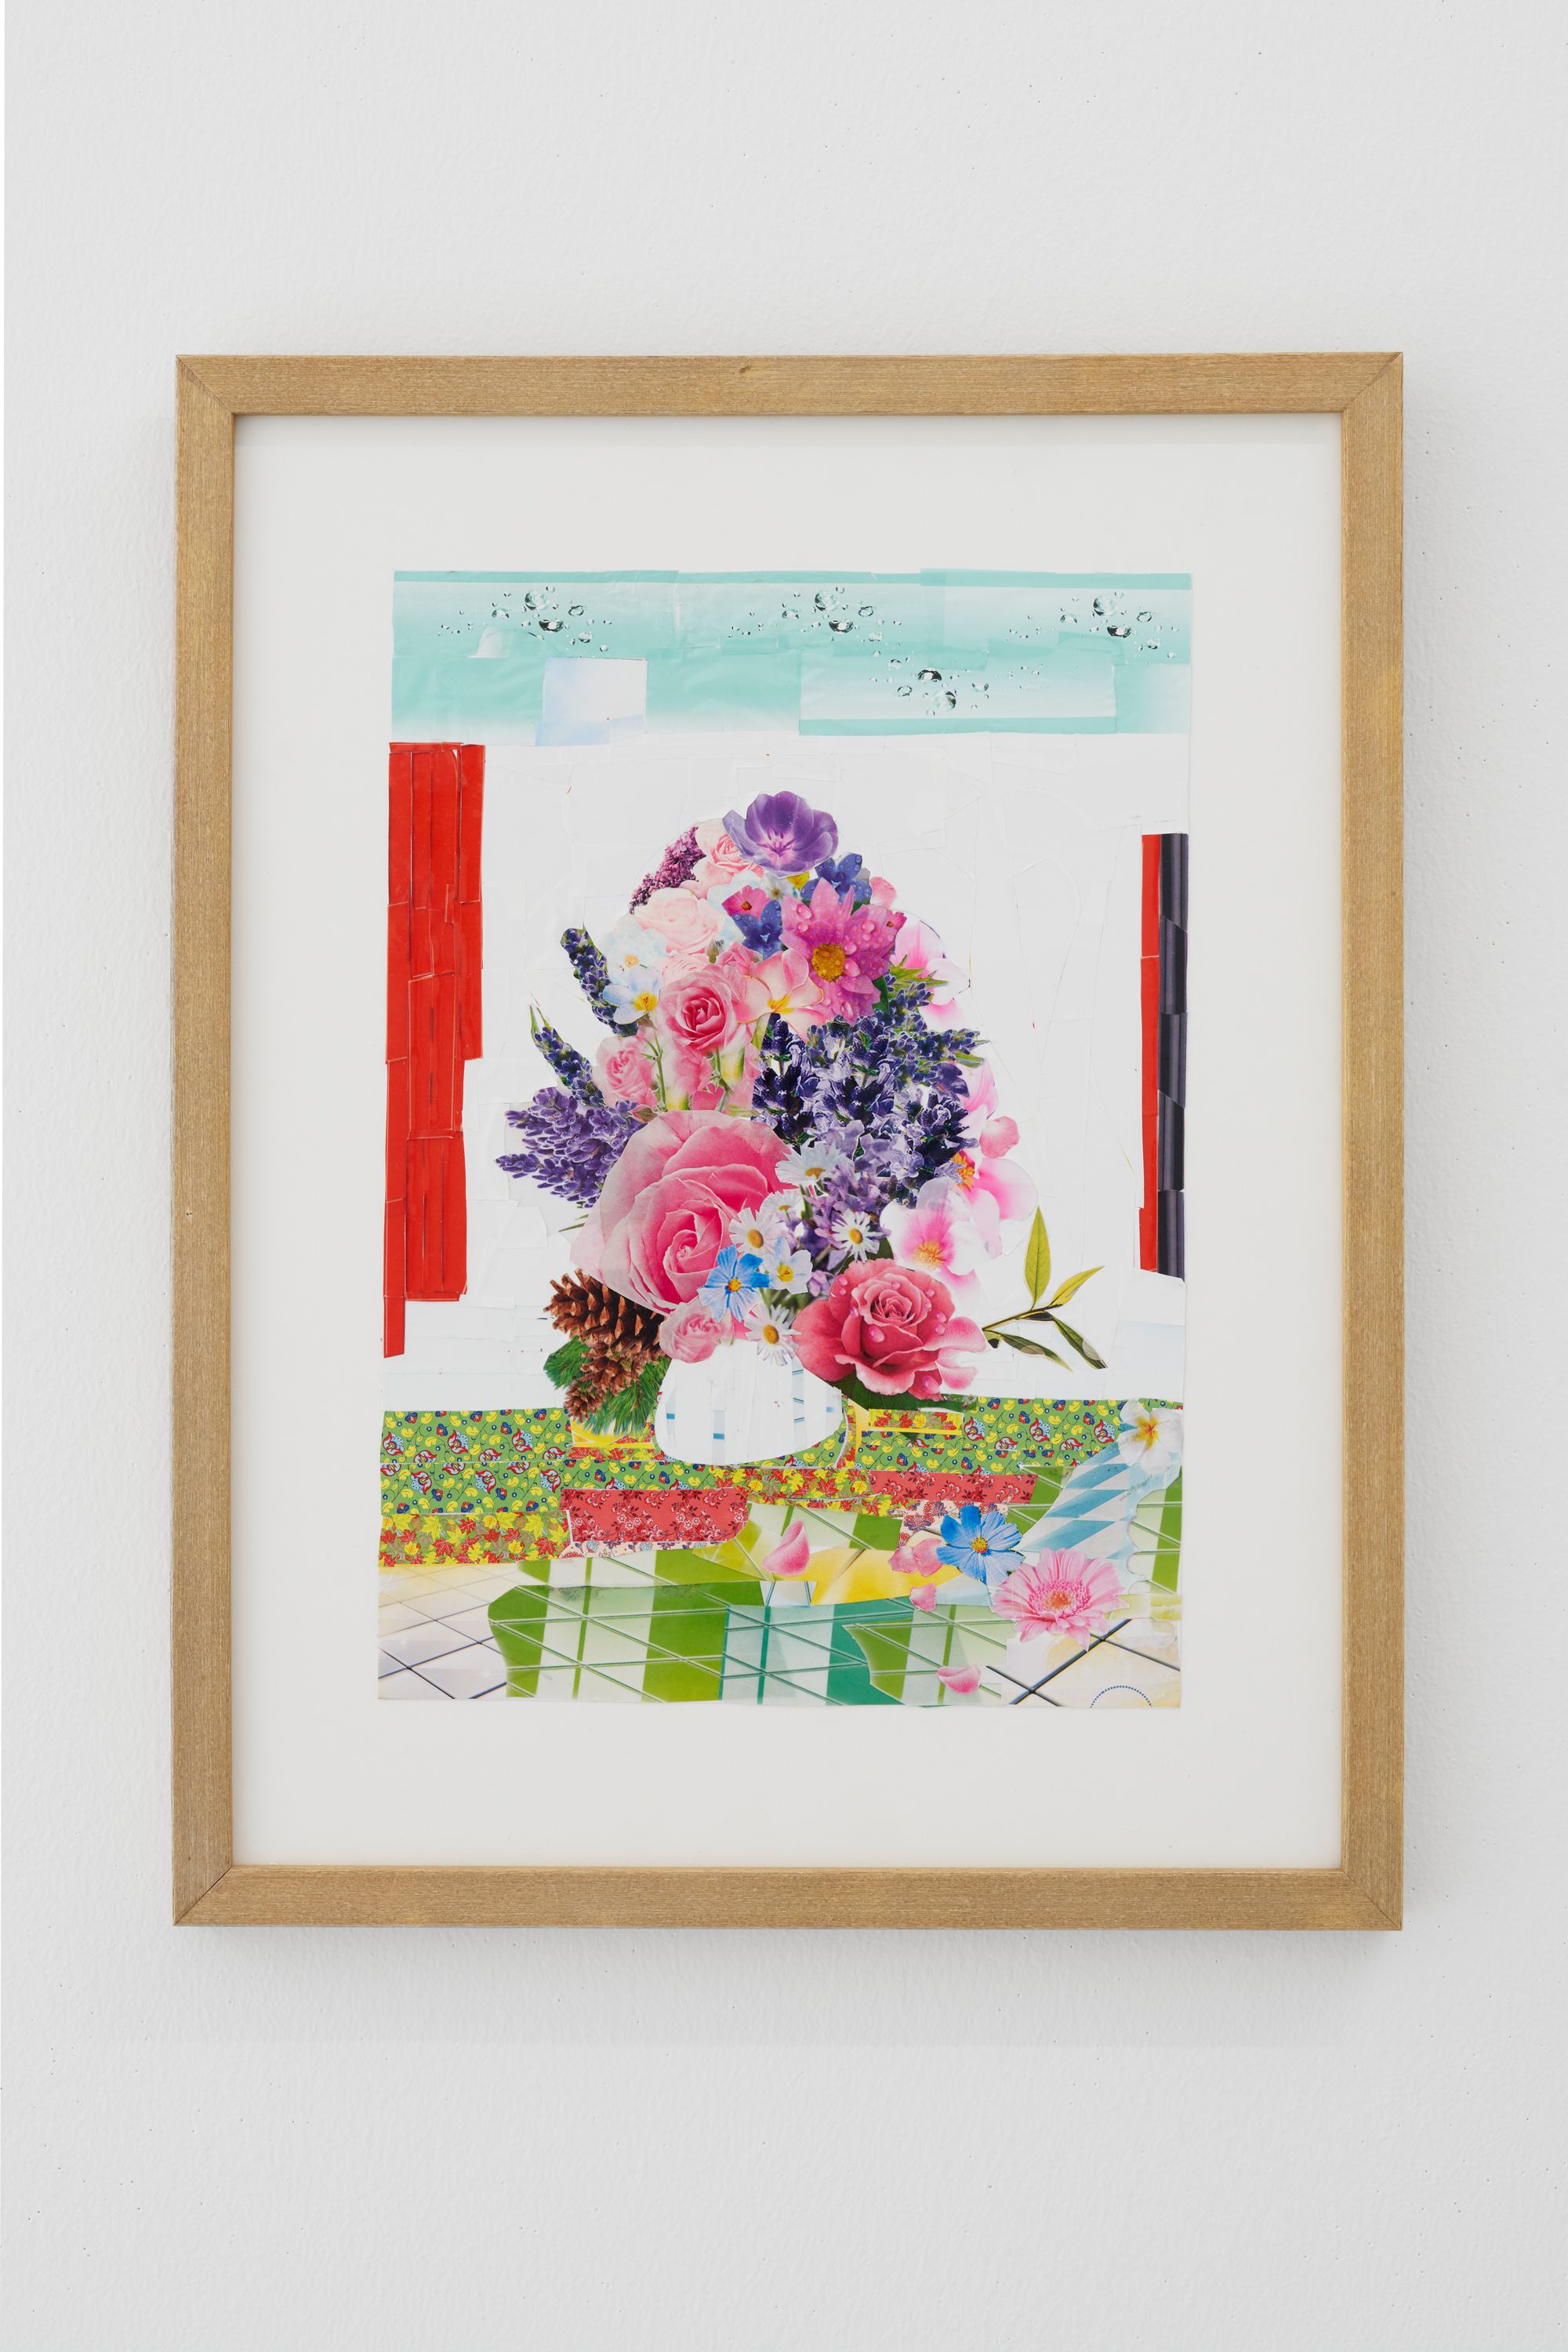 Jumana Manna, Still Life with a Bouquet of Flowers, 2018, Collage on paper from cleaning product labels, 41.10 ⁠× ⁠32.10 ⁠cm, 16 ¼ ⁠× ⁠12 ¾ inches (framed)